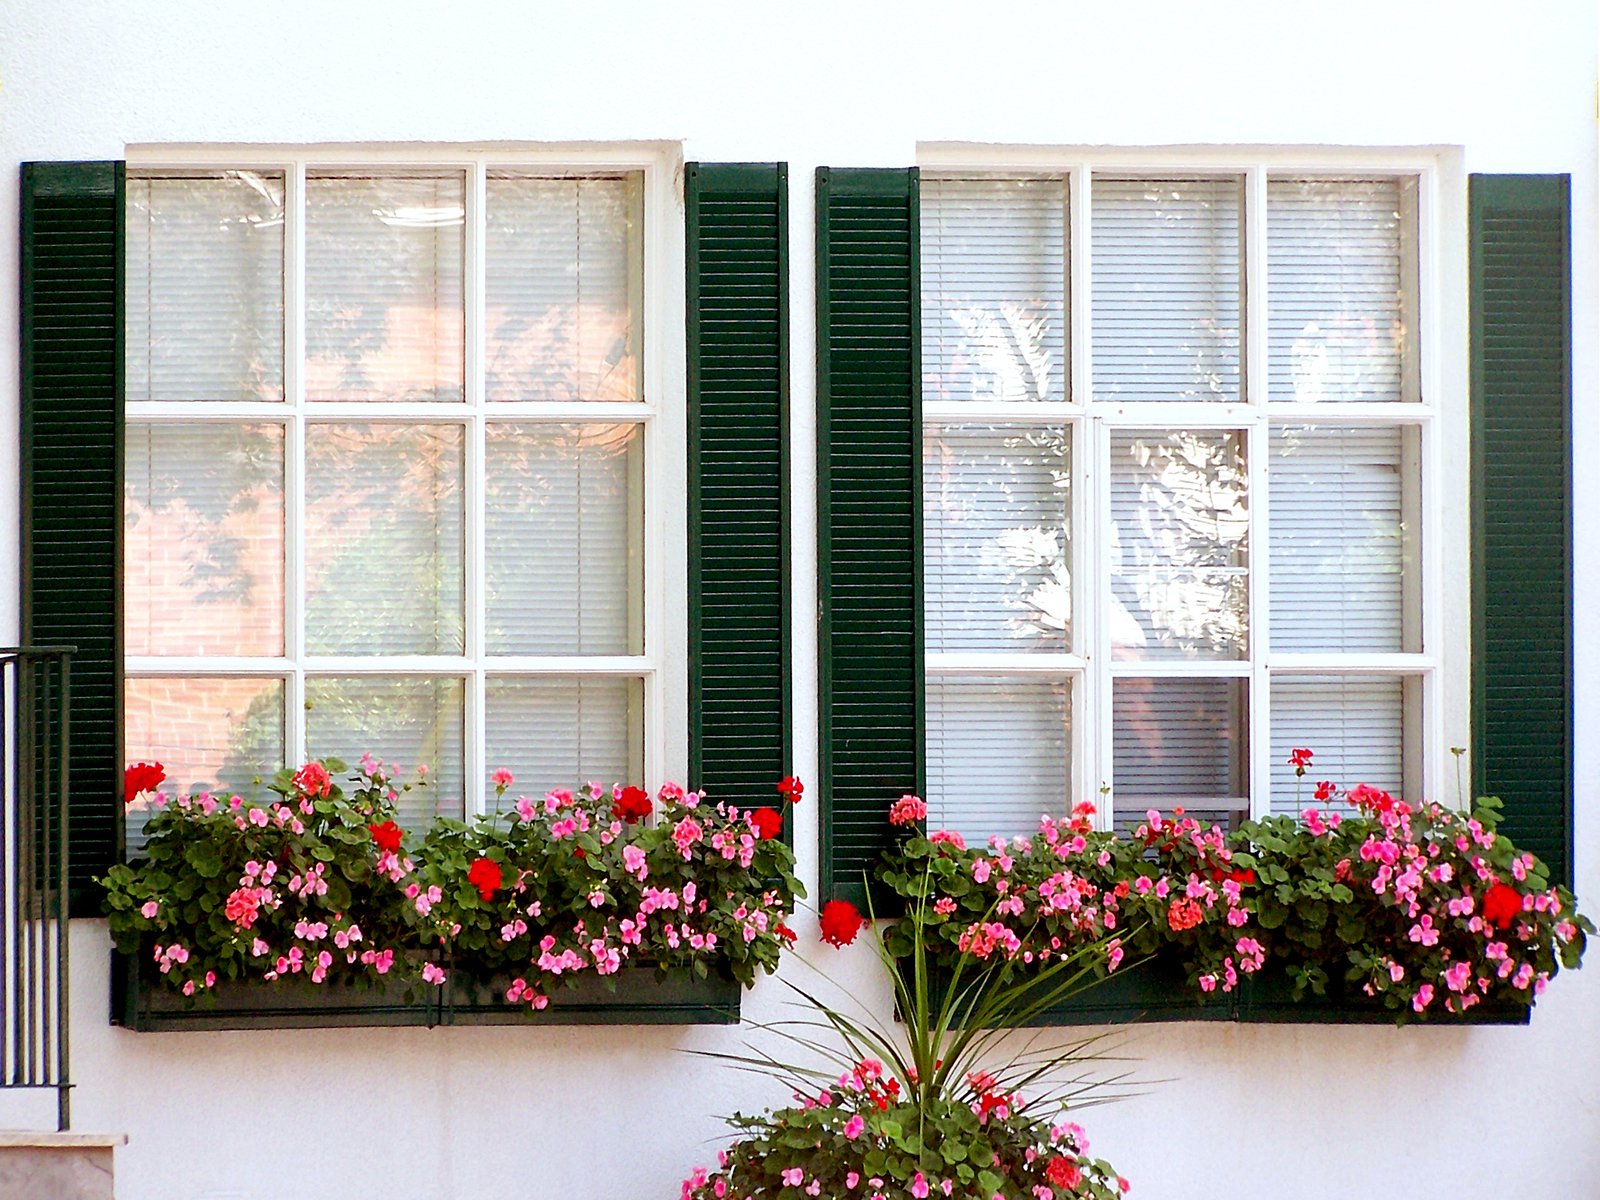 two window boxes are filled with pink and red flowers